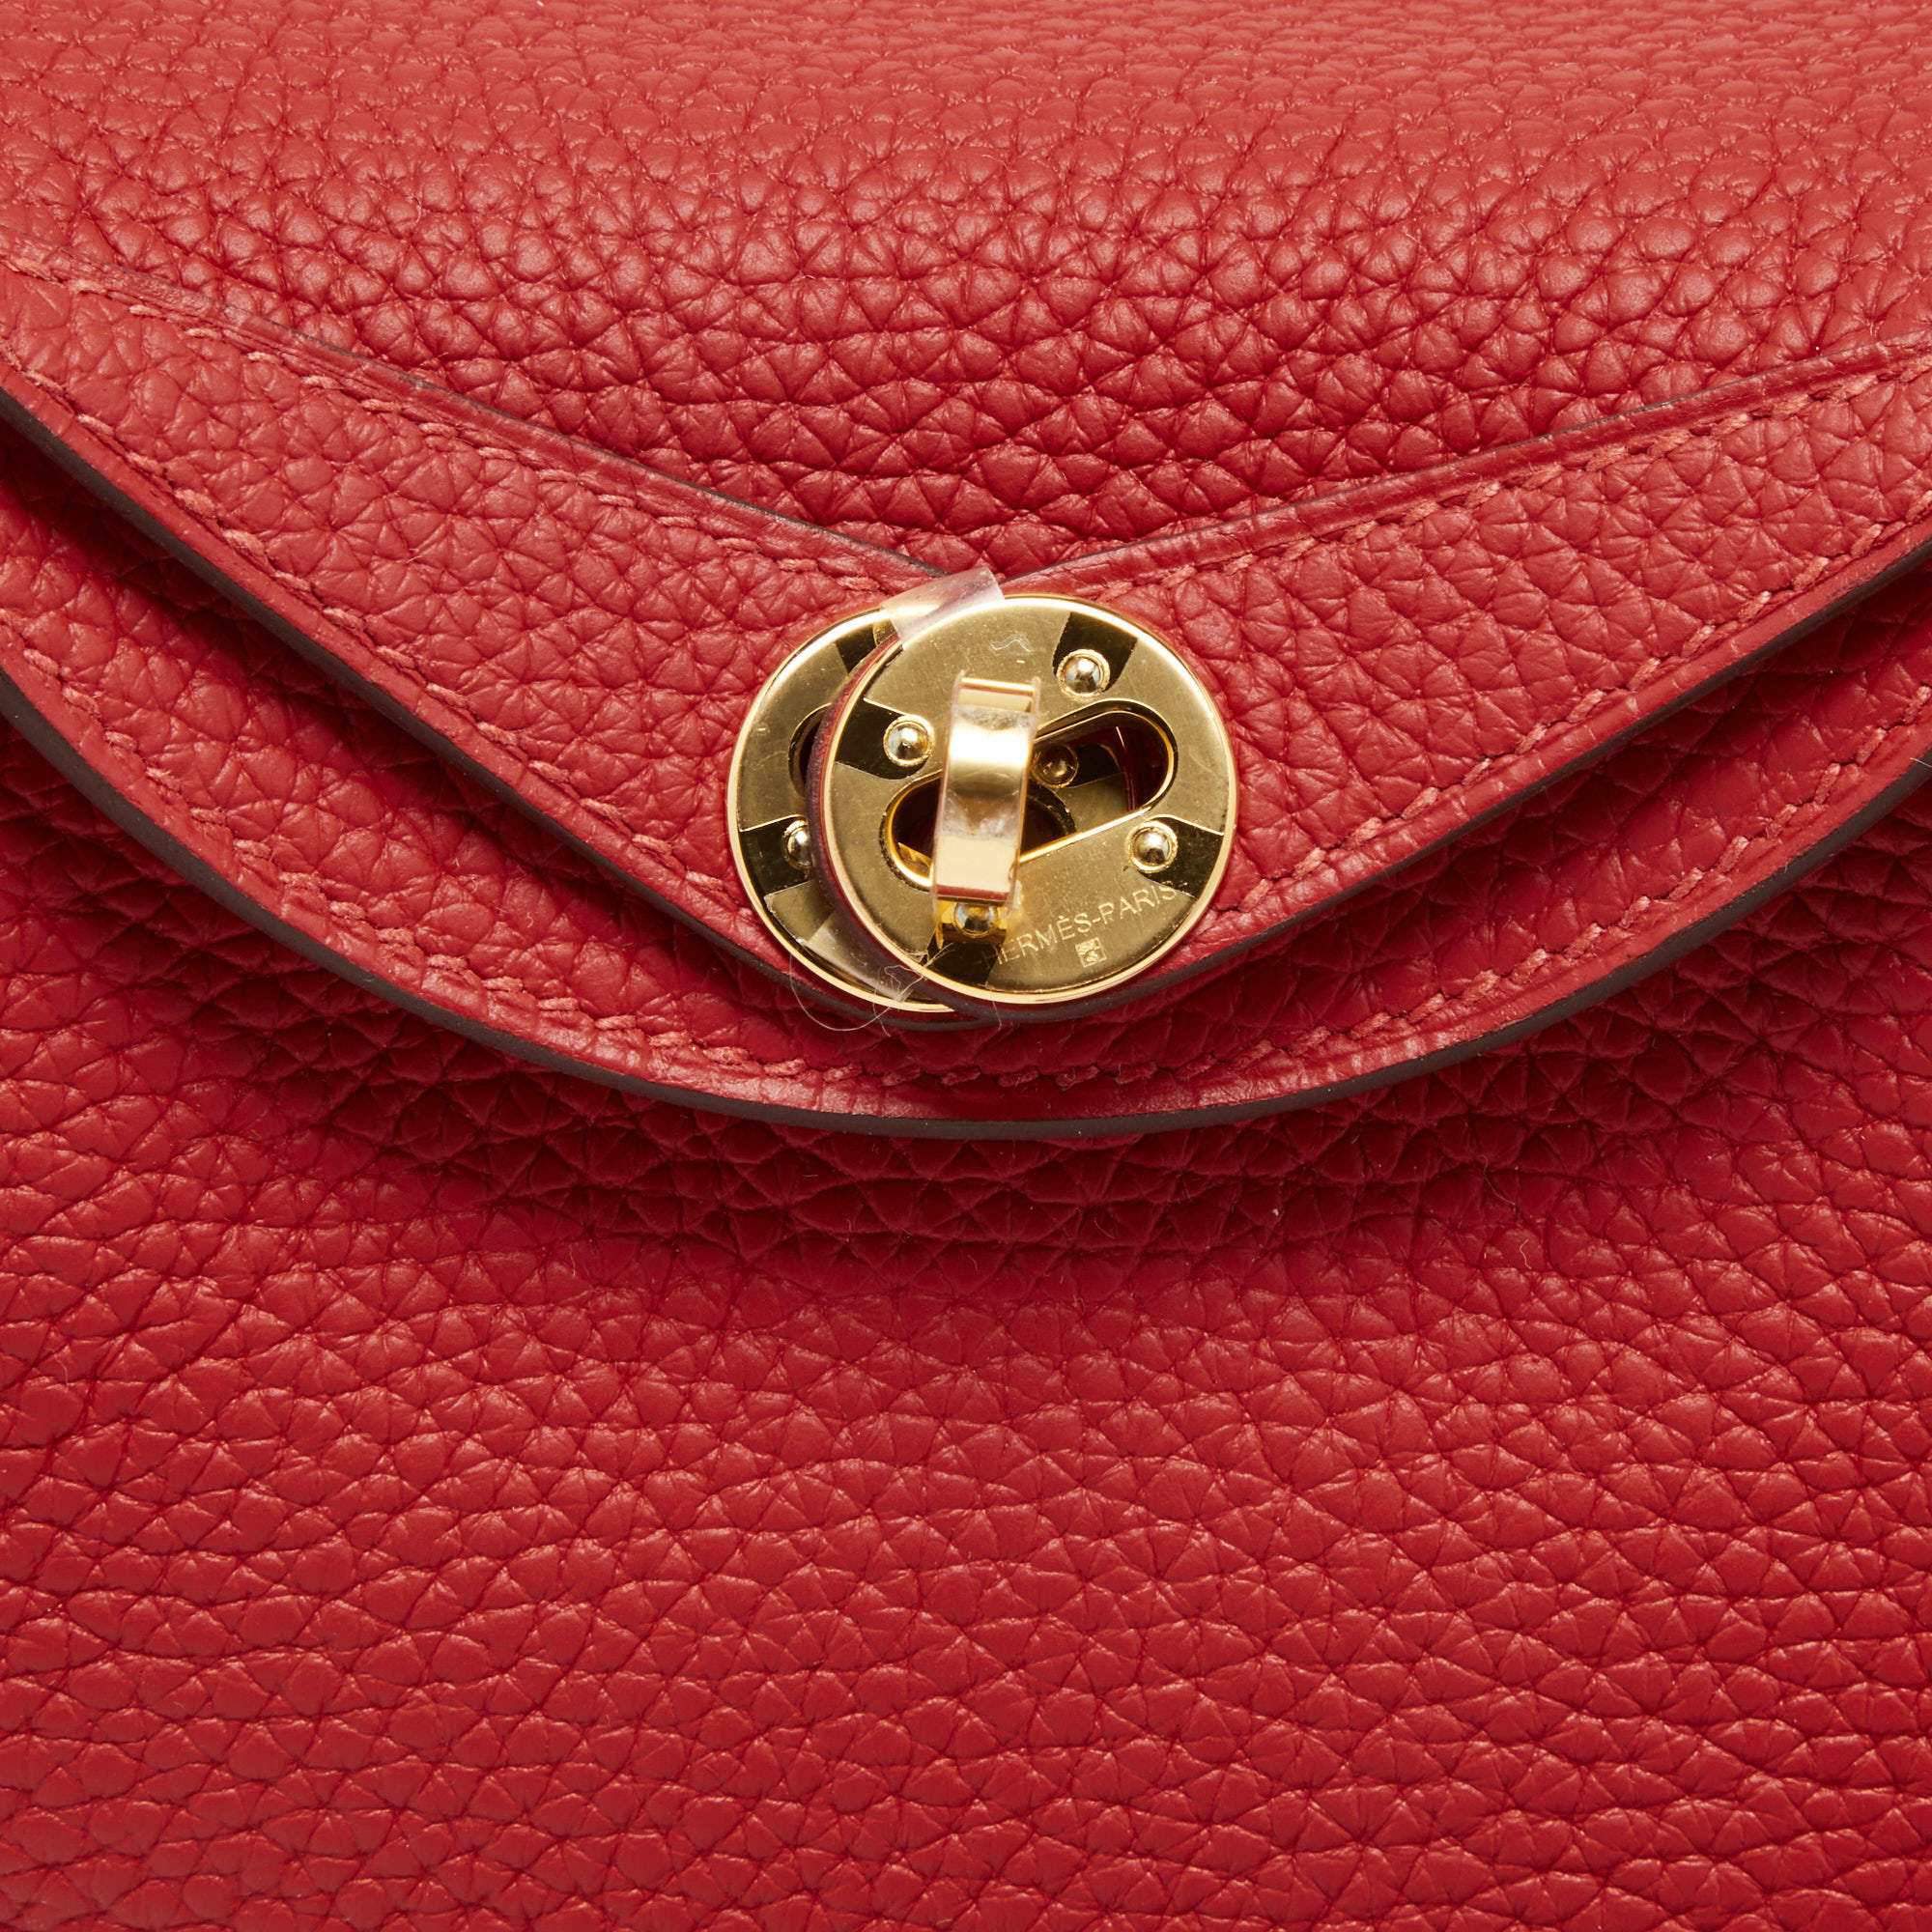 Hermès Rouge Tomate Taurillon Clemence Leather Gold Finish Mini Lindy Bag  Hermes